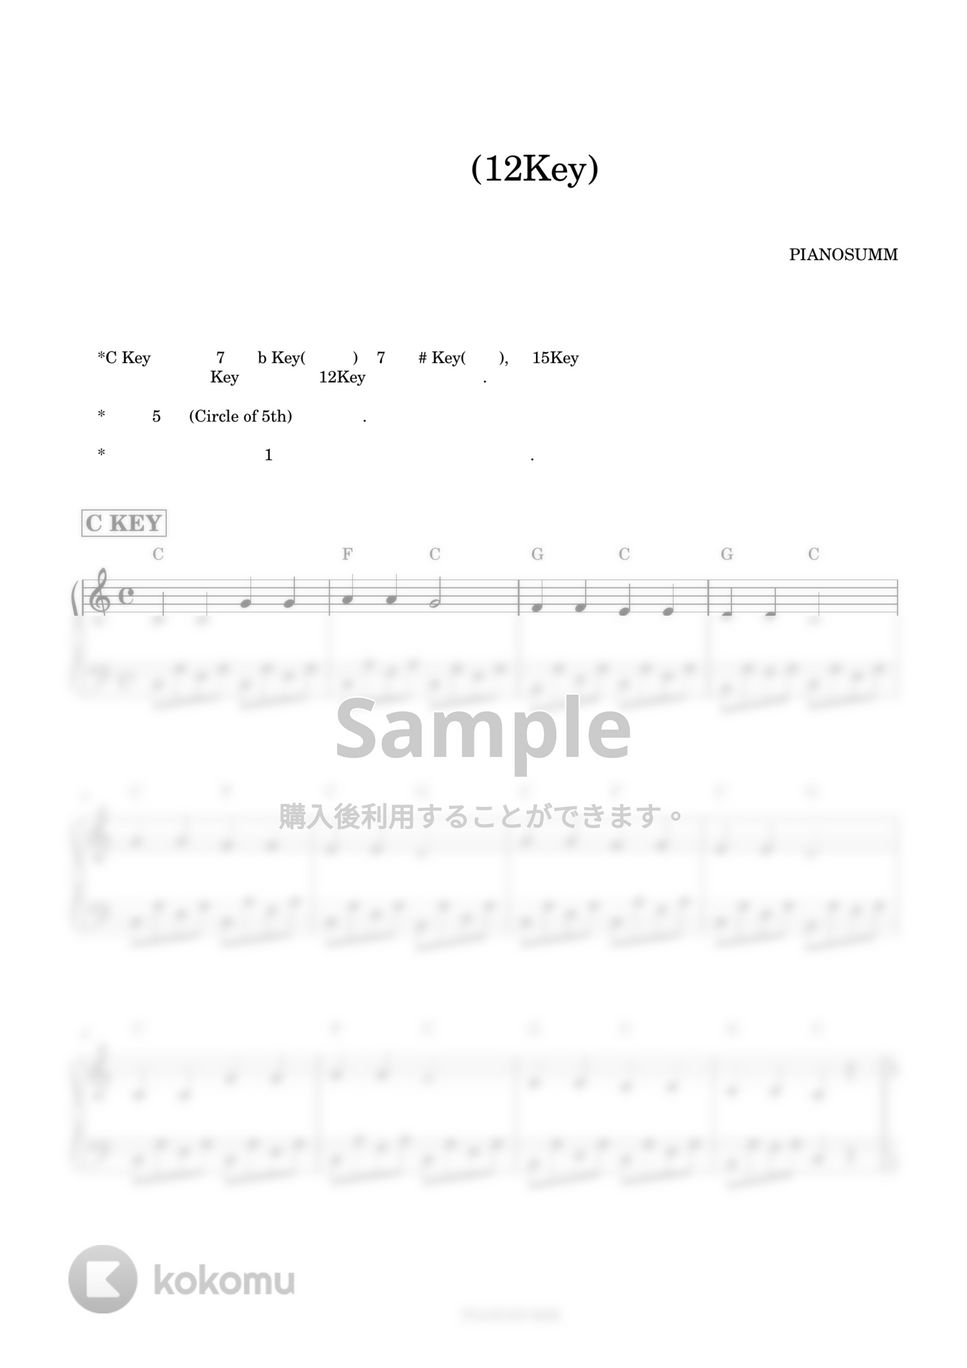 Twinkle Twinkle Little star (12Key Exercise) by PIANOSUMM